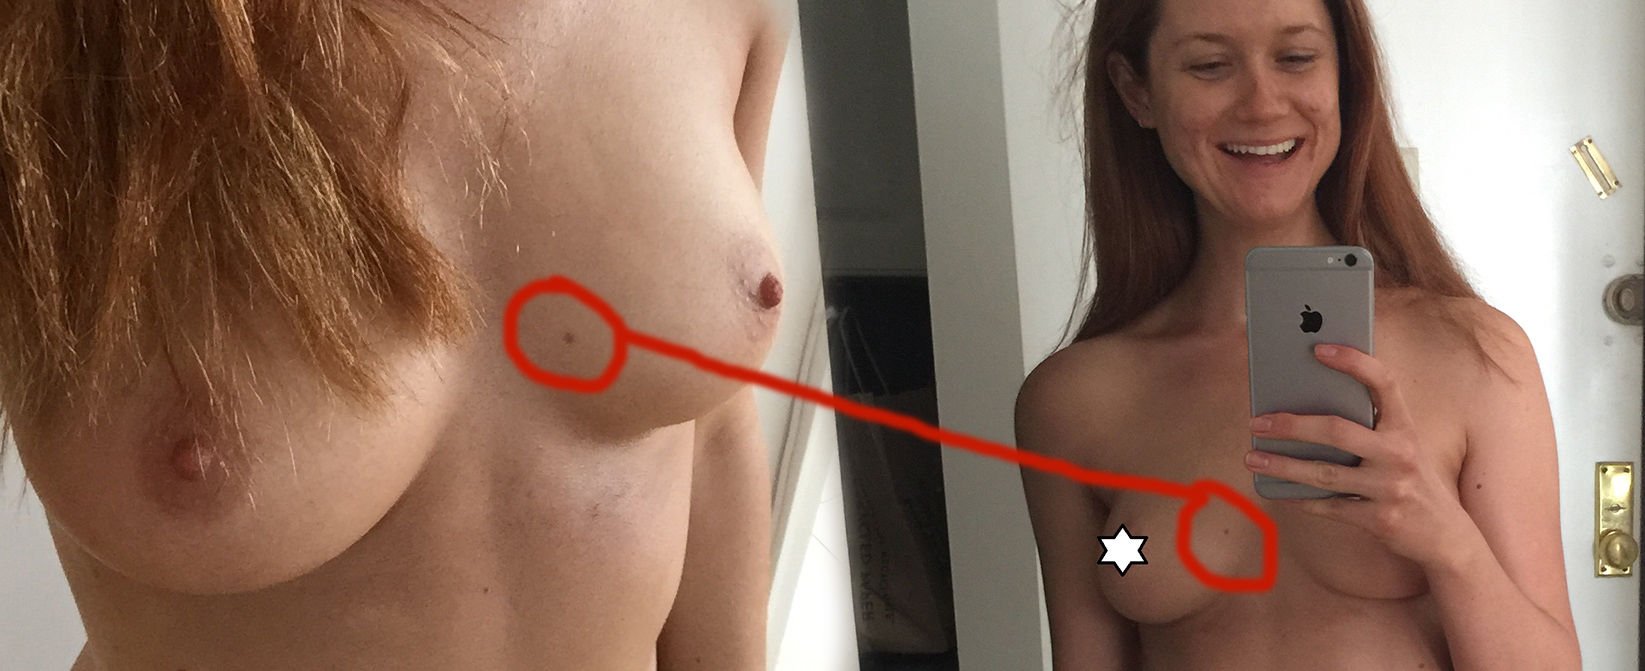 Here are a few Photoshopped nude leaked Fappening photos of Bonnie Wright. 